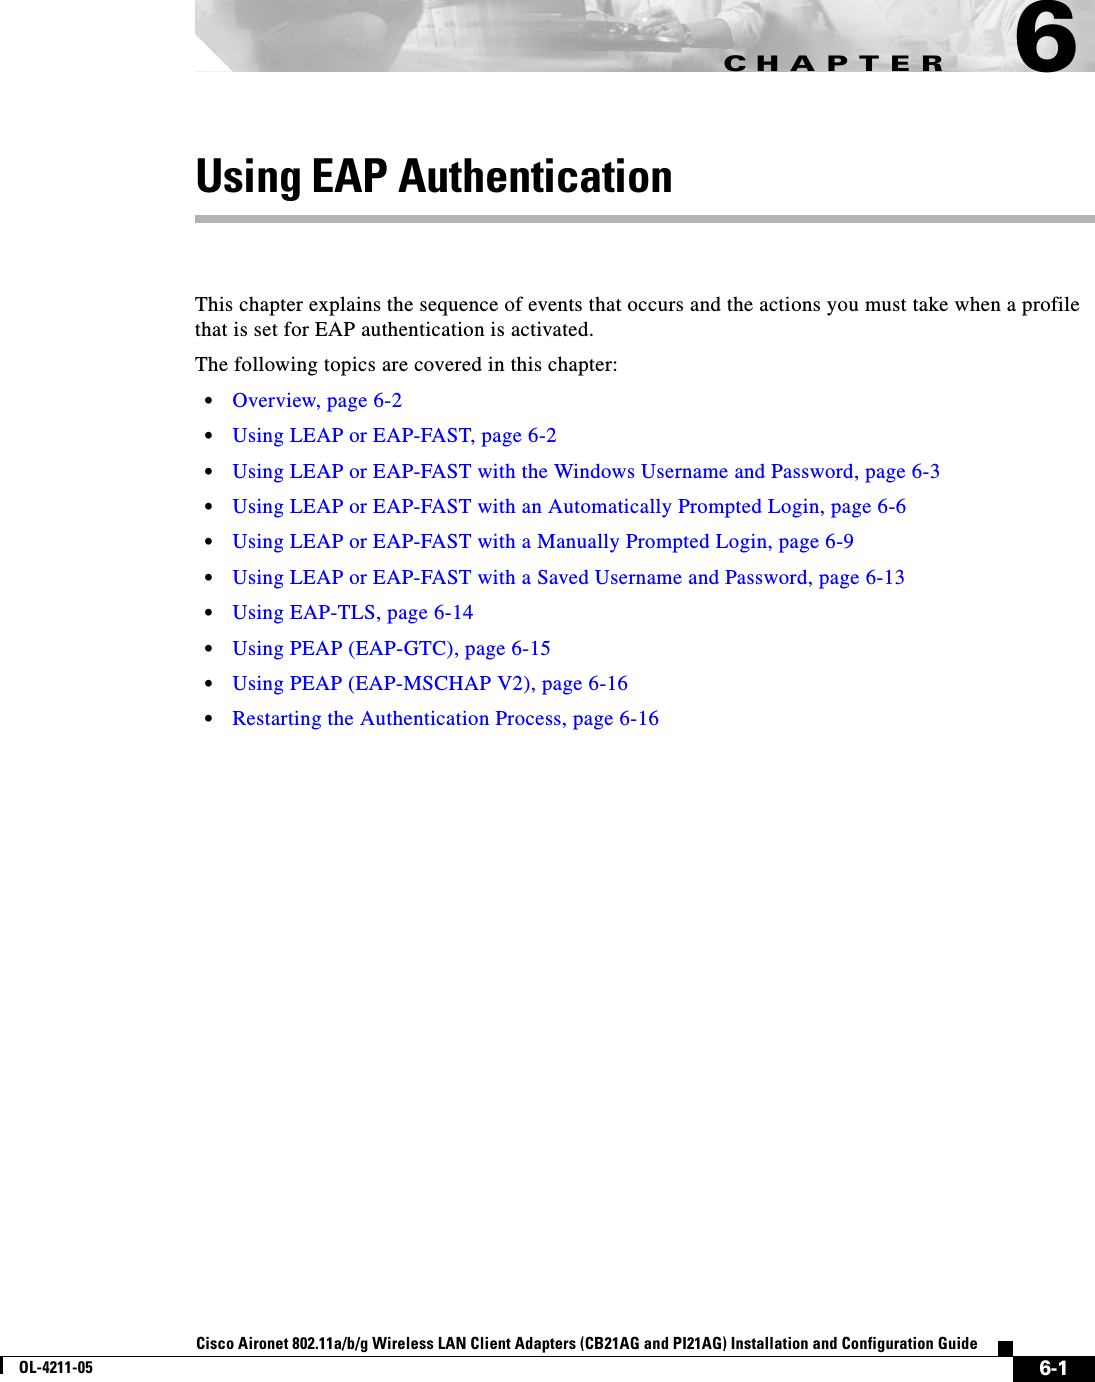 CHAPTER6-1Cisco Aironet 802.11a/b/g Wireless LAN Client Adapters (CB21AG and PI21AG) Installation and Configuration GuideOL-4211-056Using EAP AuthenticationThis chapter explains the sequence of events that occurs and the actions you must take when a profile that is set for EAP authentication is activated.The following topics are covered in this chapter:•Overview, page 6-2•Using LEAP or EAP-FAST, page 6-2•Using LEAP or EAP-FAST with the Windows Username and Password, page 6-3•Using LEAP or EAP-FAST with an Automatically Prompted Login, page 6-6•Using LEAP or EAP-FAST with a Manually Prompted Login, page 6-9•Using LEAP or EAP-FAST with a Saved Username and Password, page 6-13•Using EAP-TLS, page 6-14•Using PEAP (EAP-GTC), page 6-15•Using PEAP (EAP-MSCHAP V2), page 6-16•Restarting the Authentication Process, page 6-16